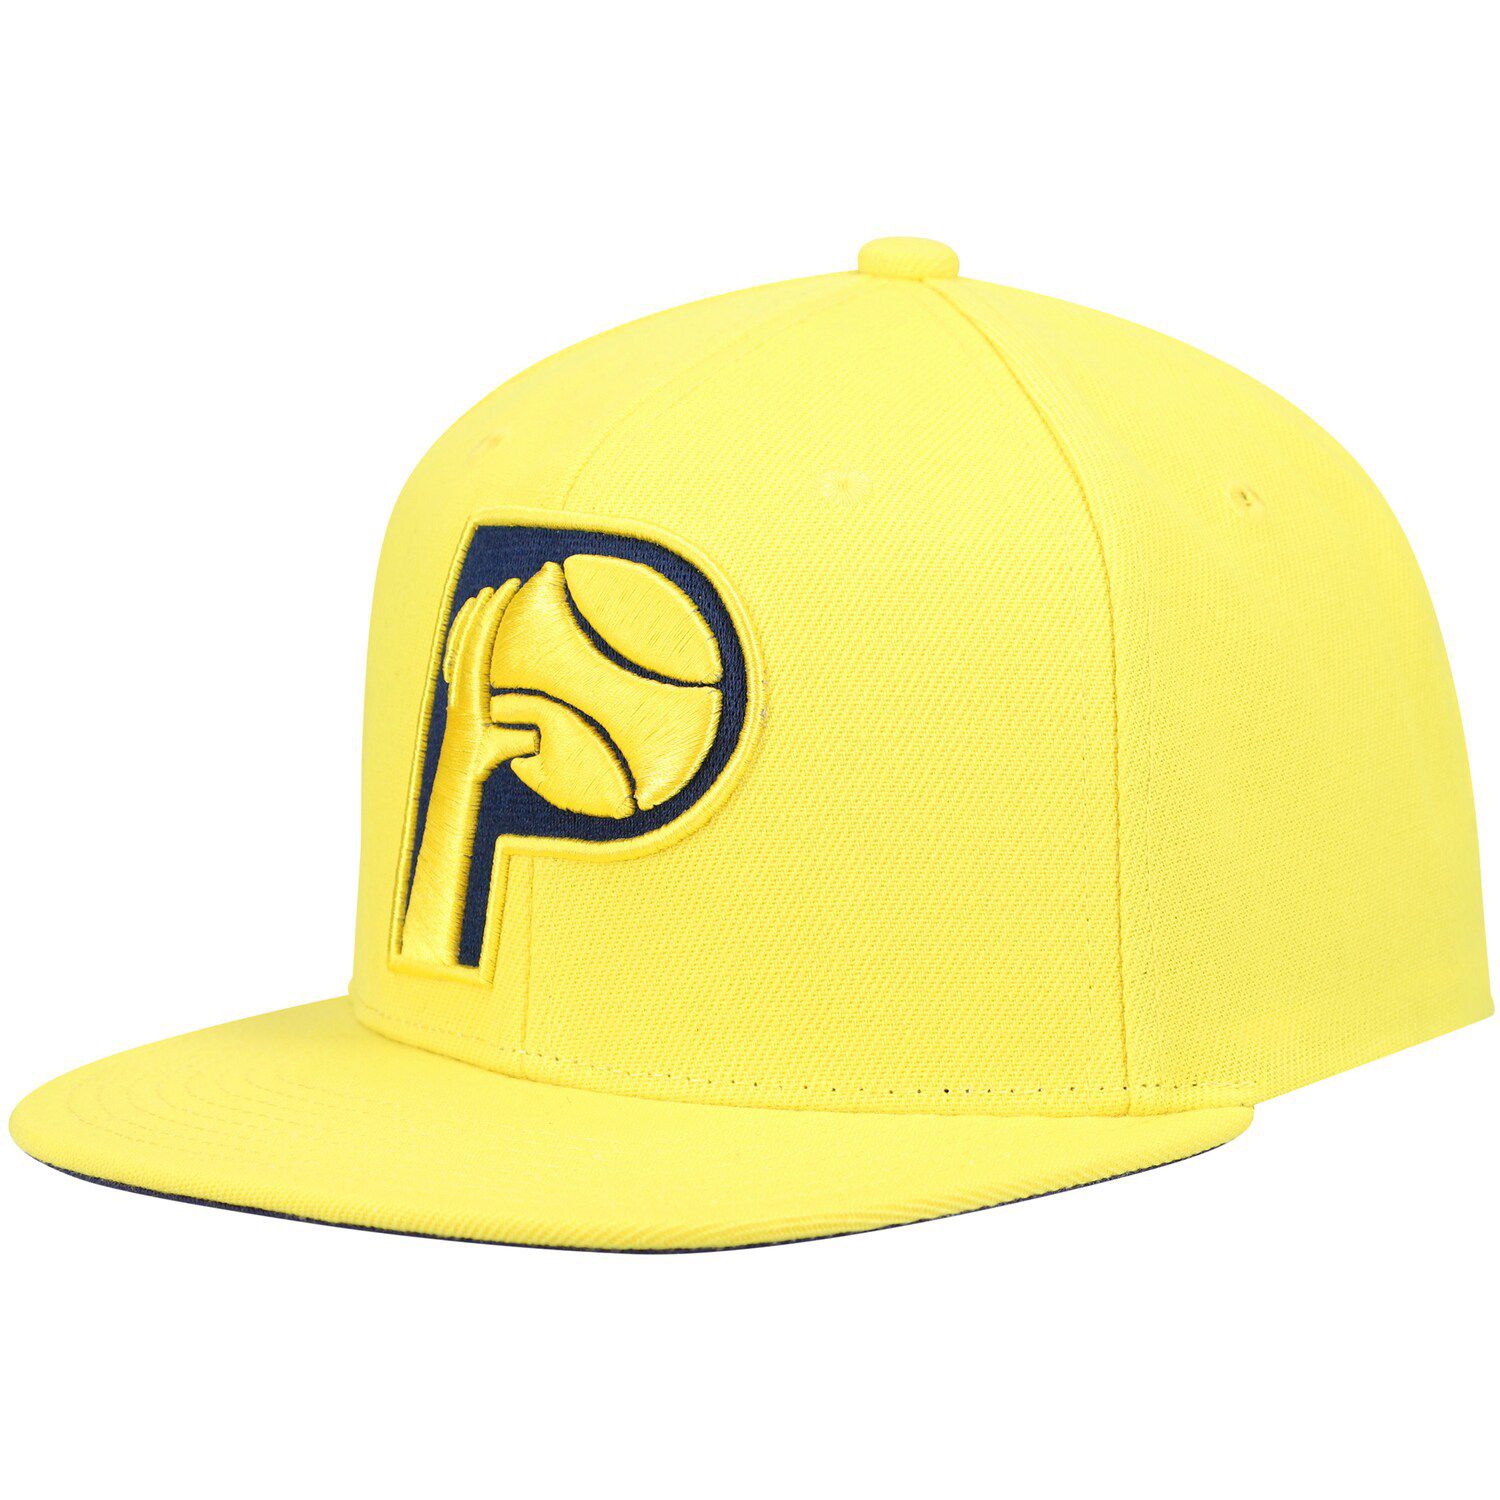 Image for Unbranded Men's Mitchell & Ness Yellow Indiana Pacers Hardwood Classics Tonal Snapback Hat at Kohl's.